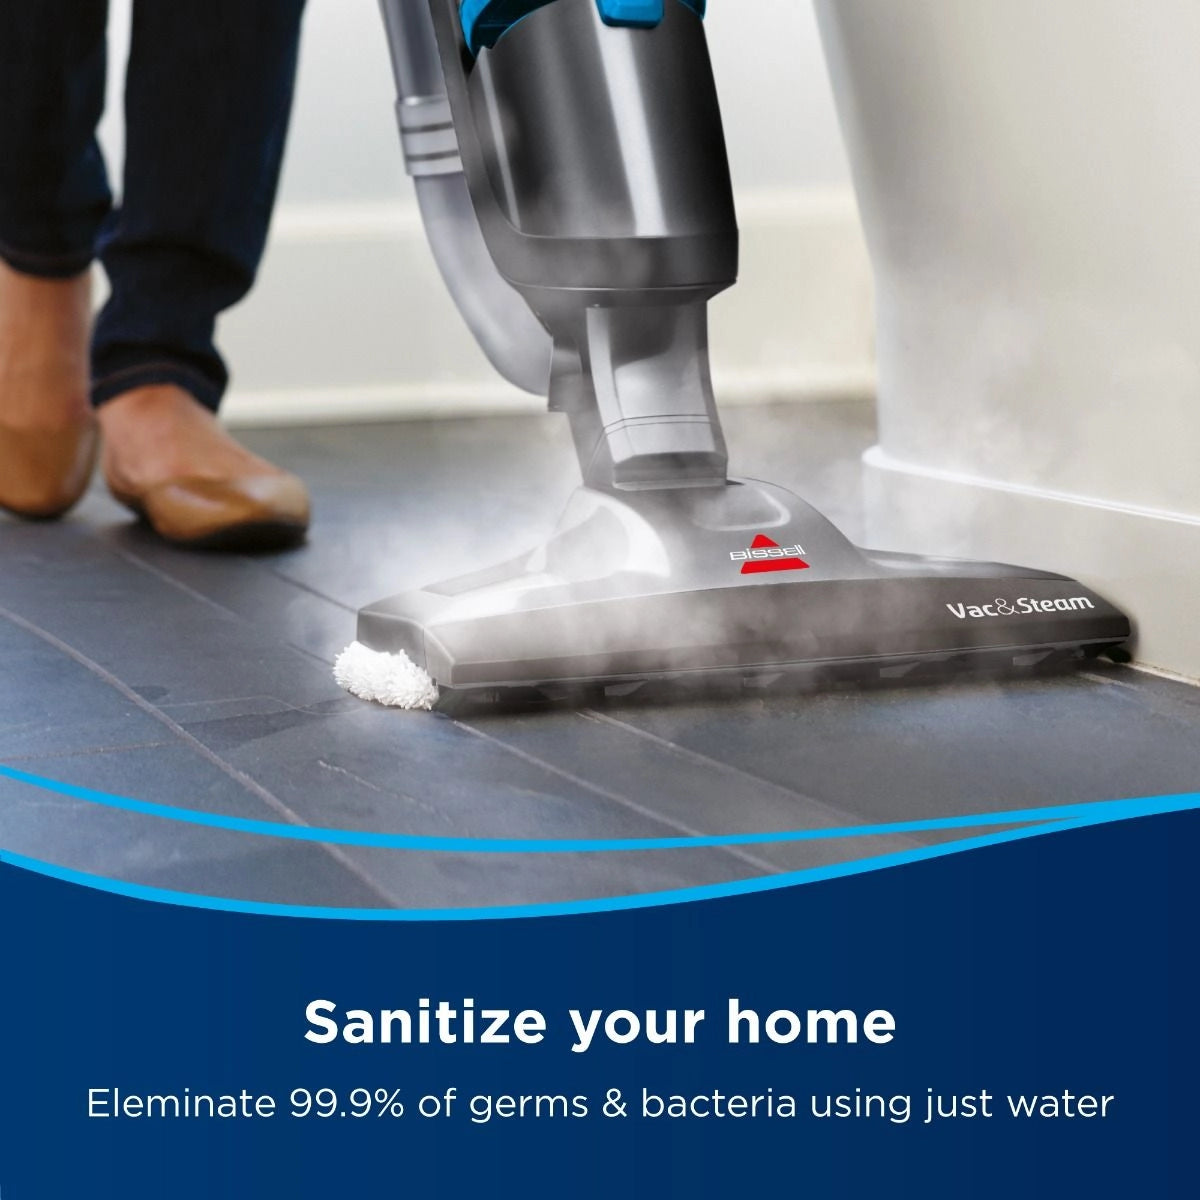 BISSELL Multi Function Vacuum and Steam 1600 W